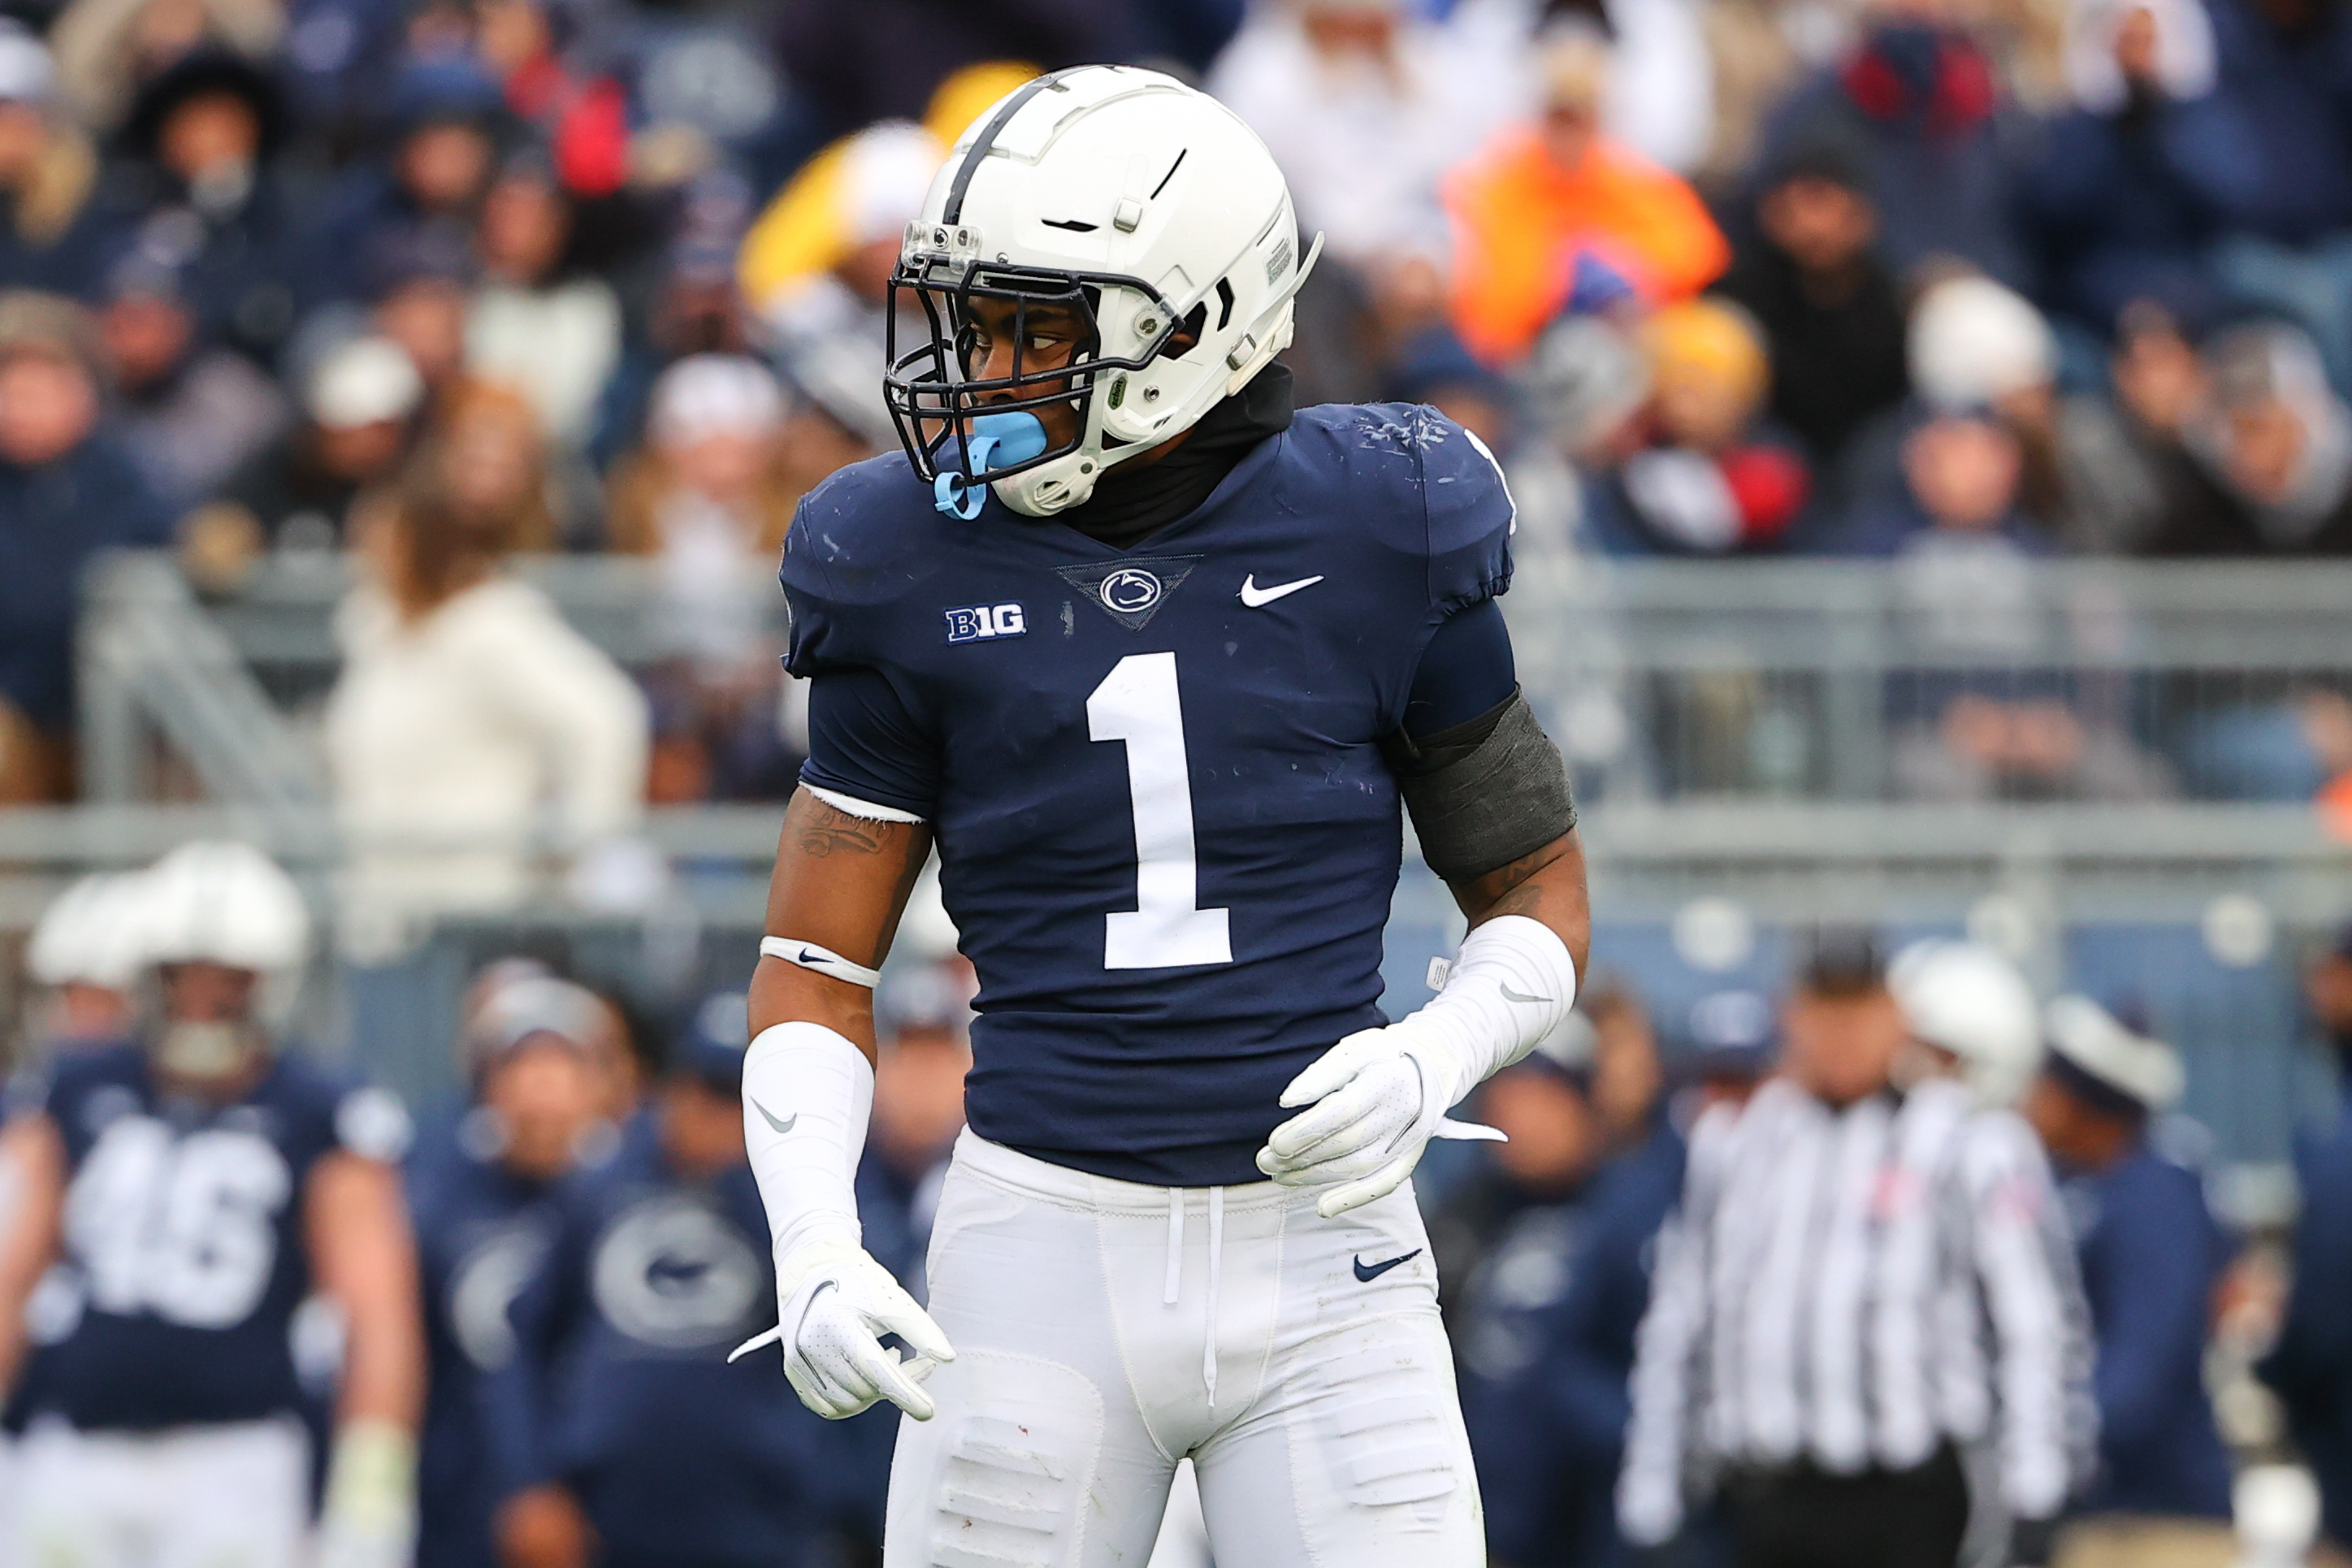 Missed opportunity motivates Penn State's Jahan Dotson to work harder